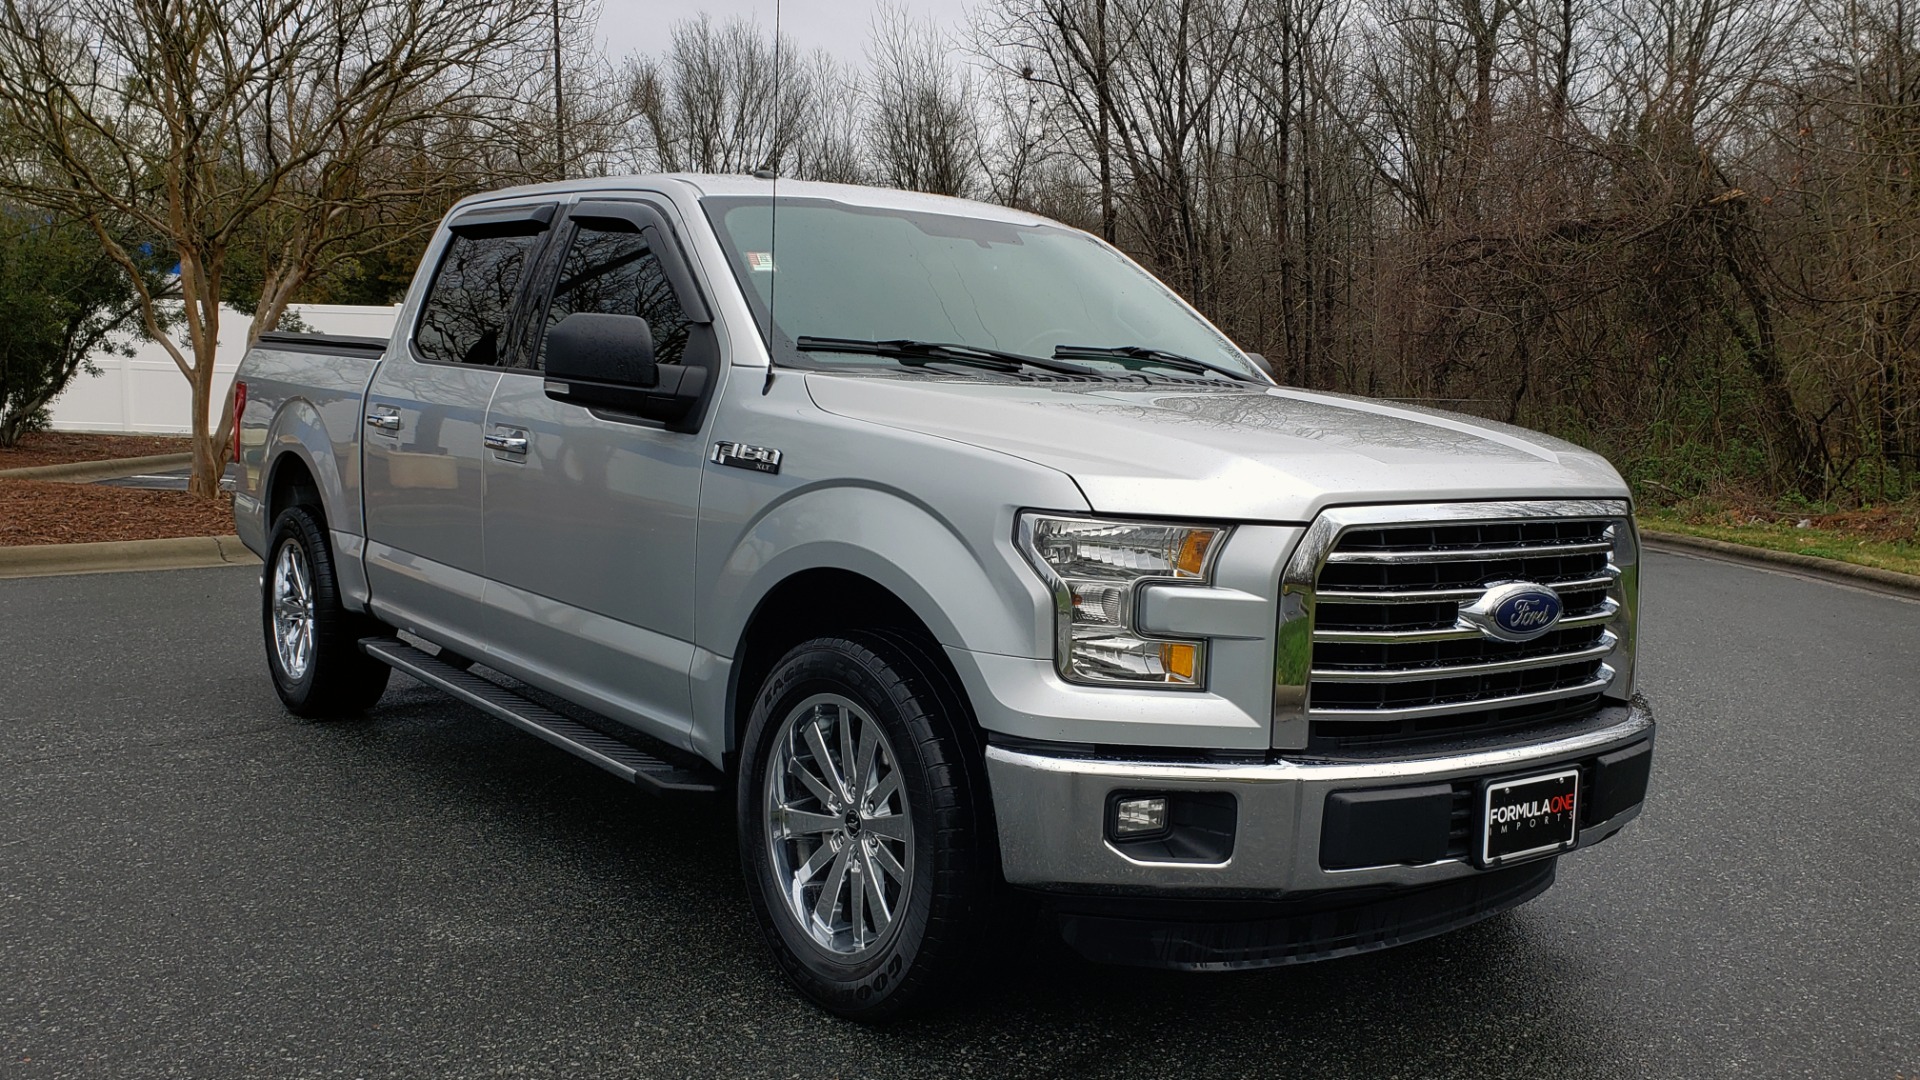 Used 2015 Ford F-150 XLT 4X2 SUPERCREW / 5.0L V8 / SYNC / REARVIEW for sale Sold at Formula Imports in Charlotte NC 28227 4